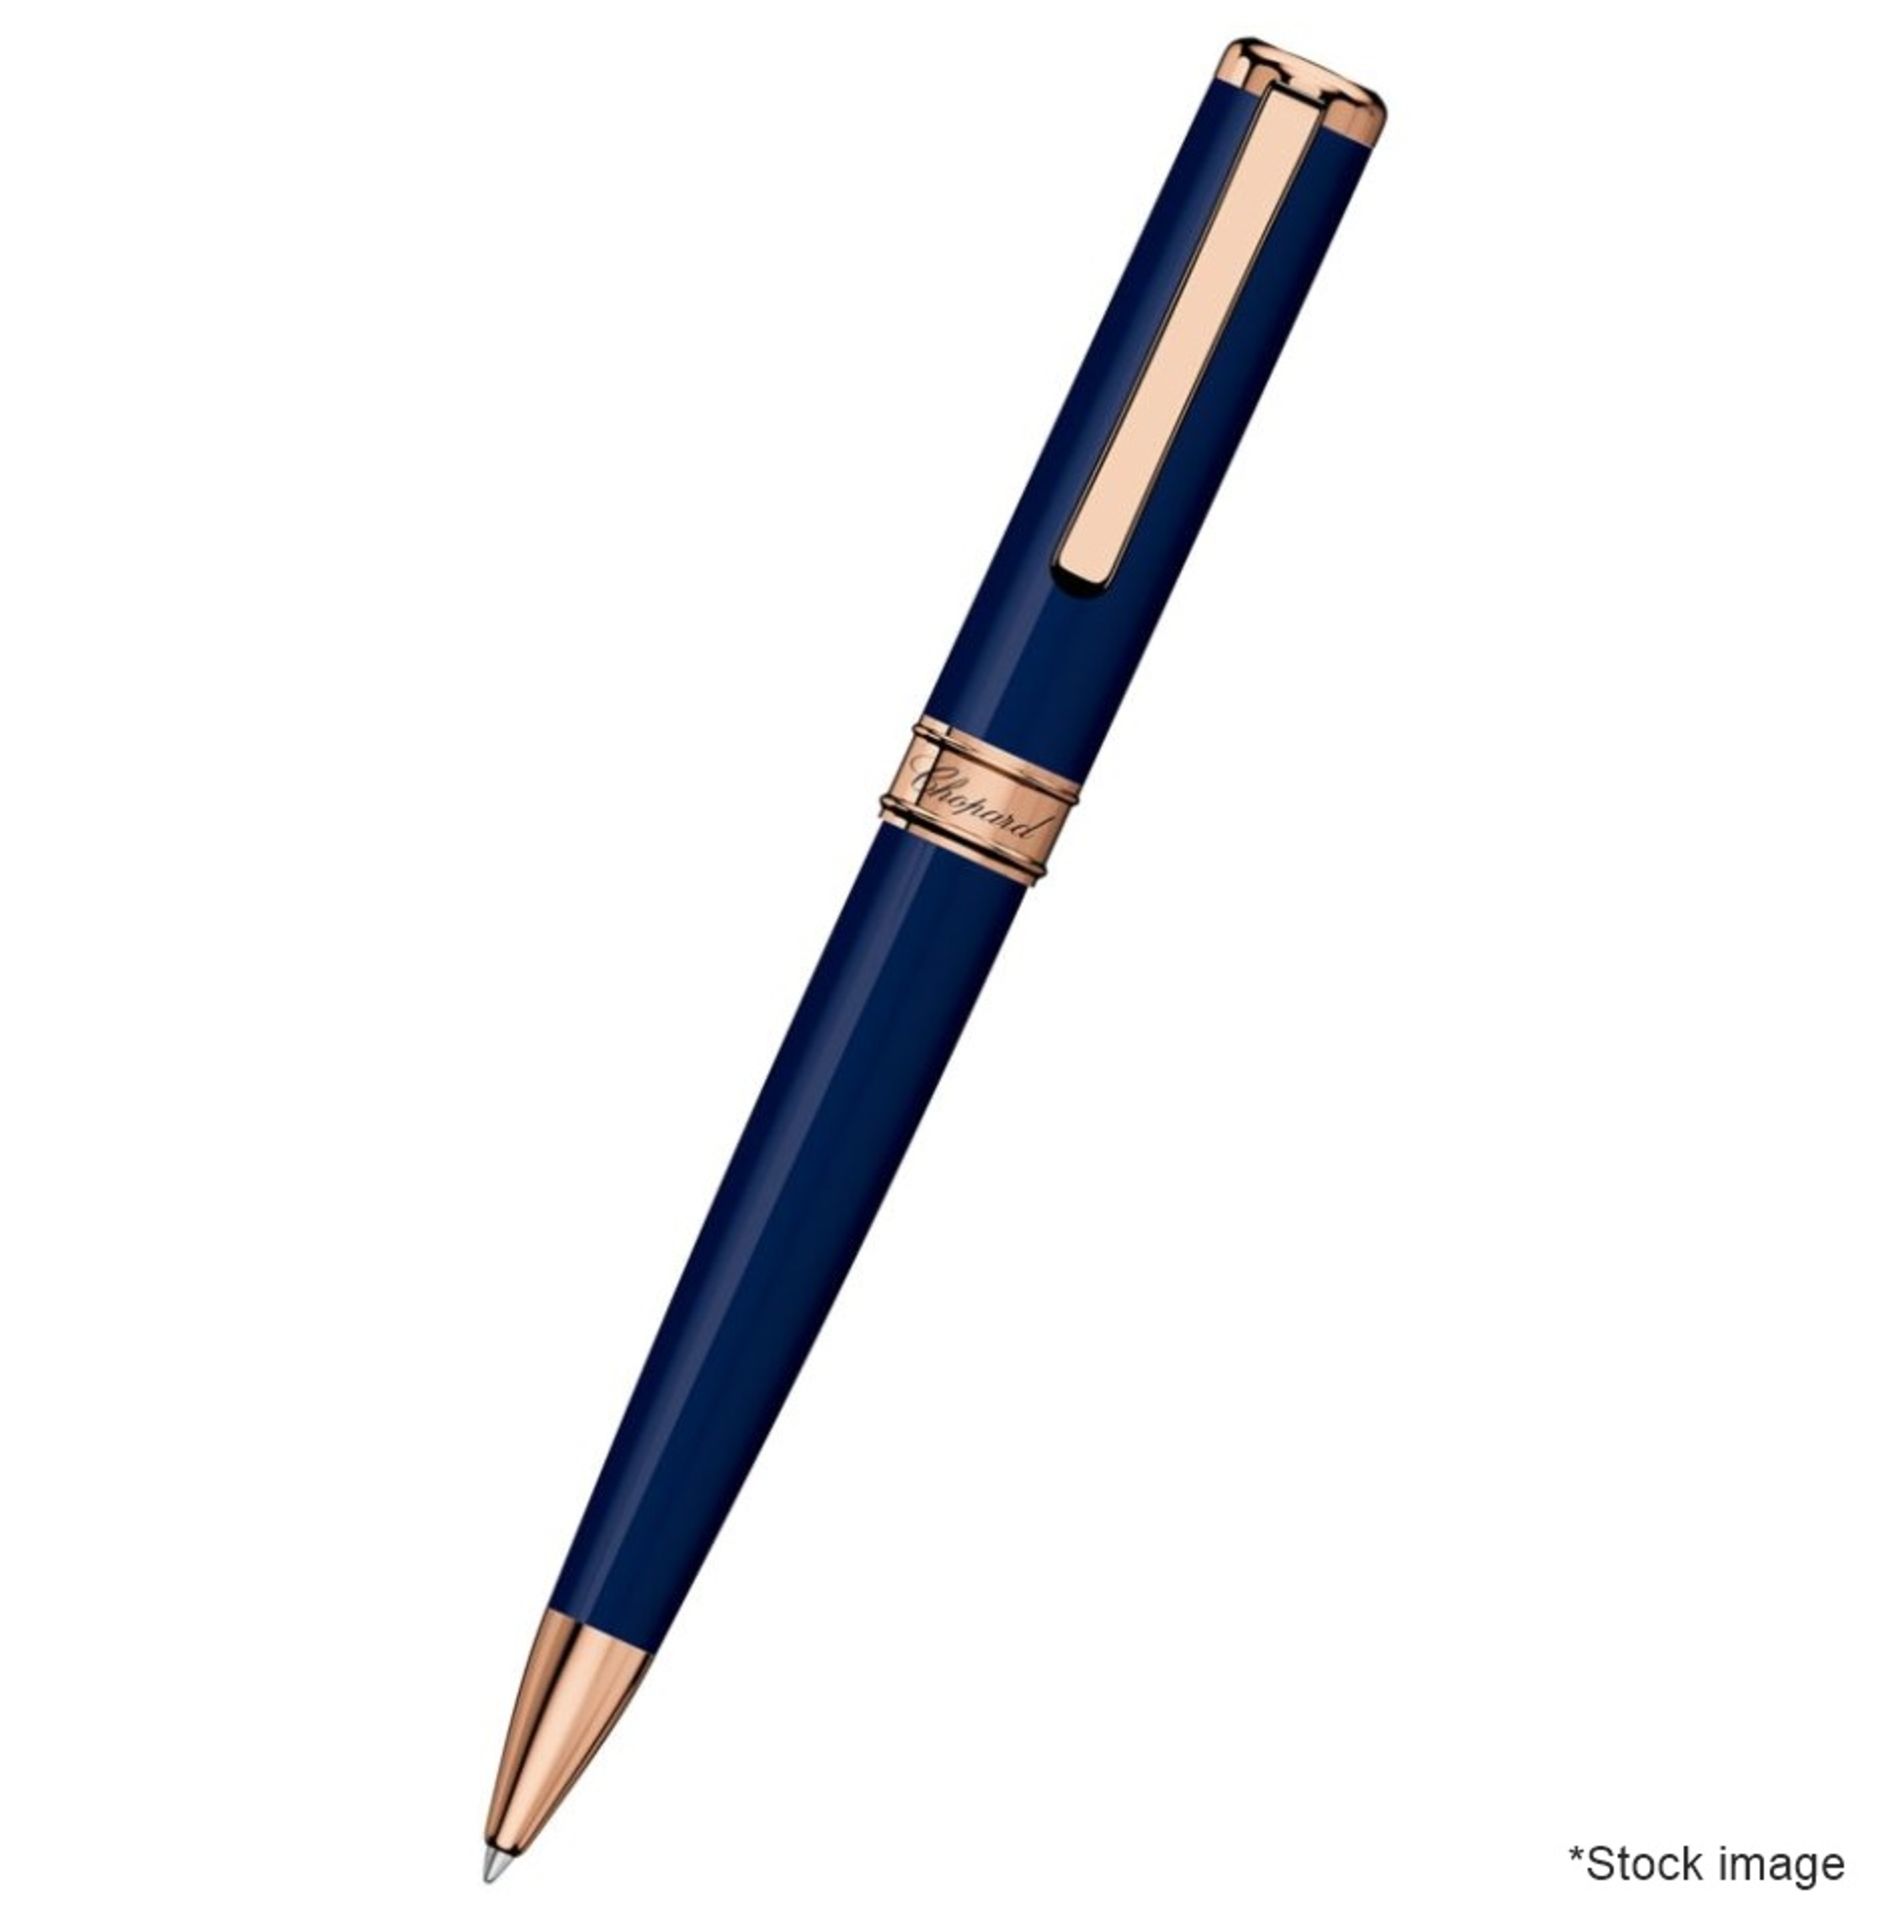 1 x CHOPARD 'Classic' Luxury Ballpoint Pen With Presentation Case, Navy Blue - Boxed Stock -